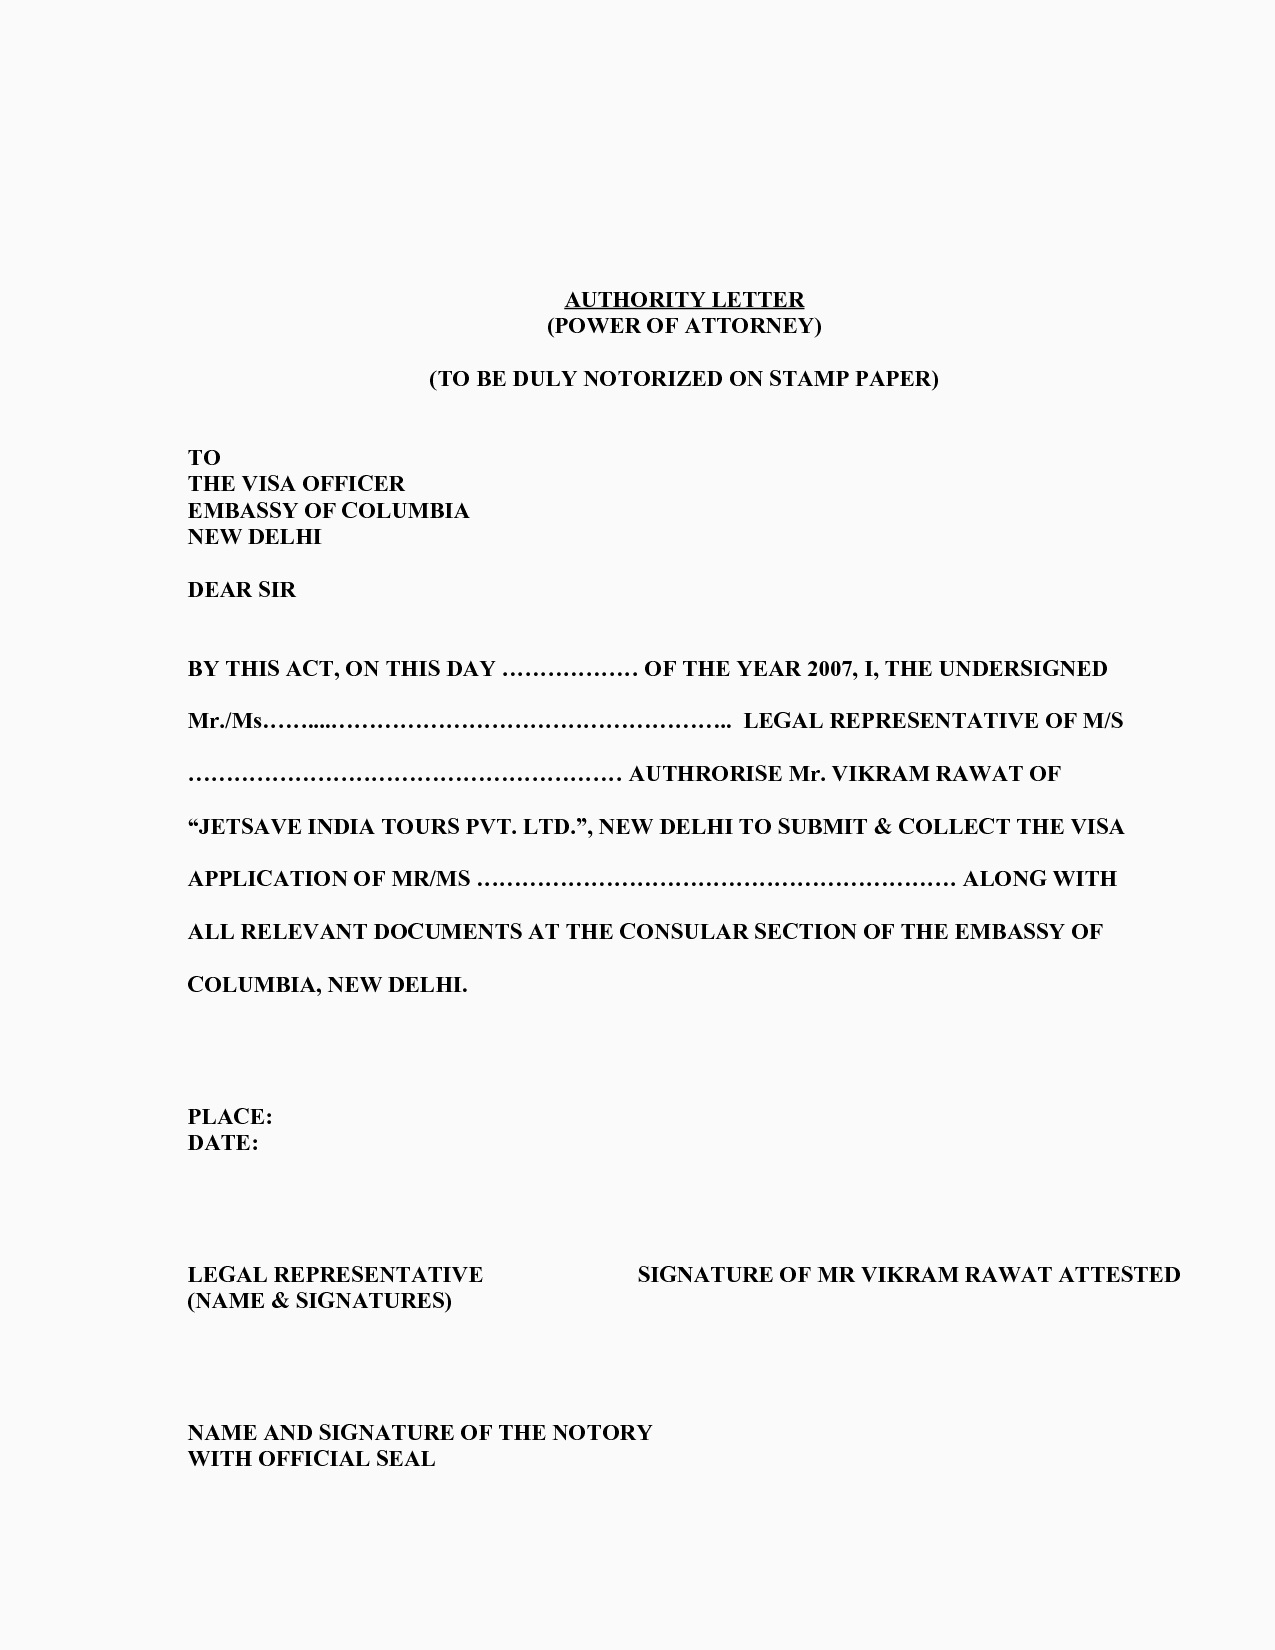 General Power Of attorney Letter Template - Sample Poa Letters Acurnamedia